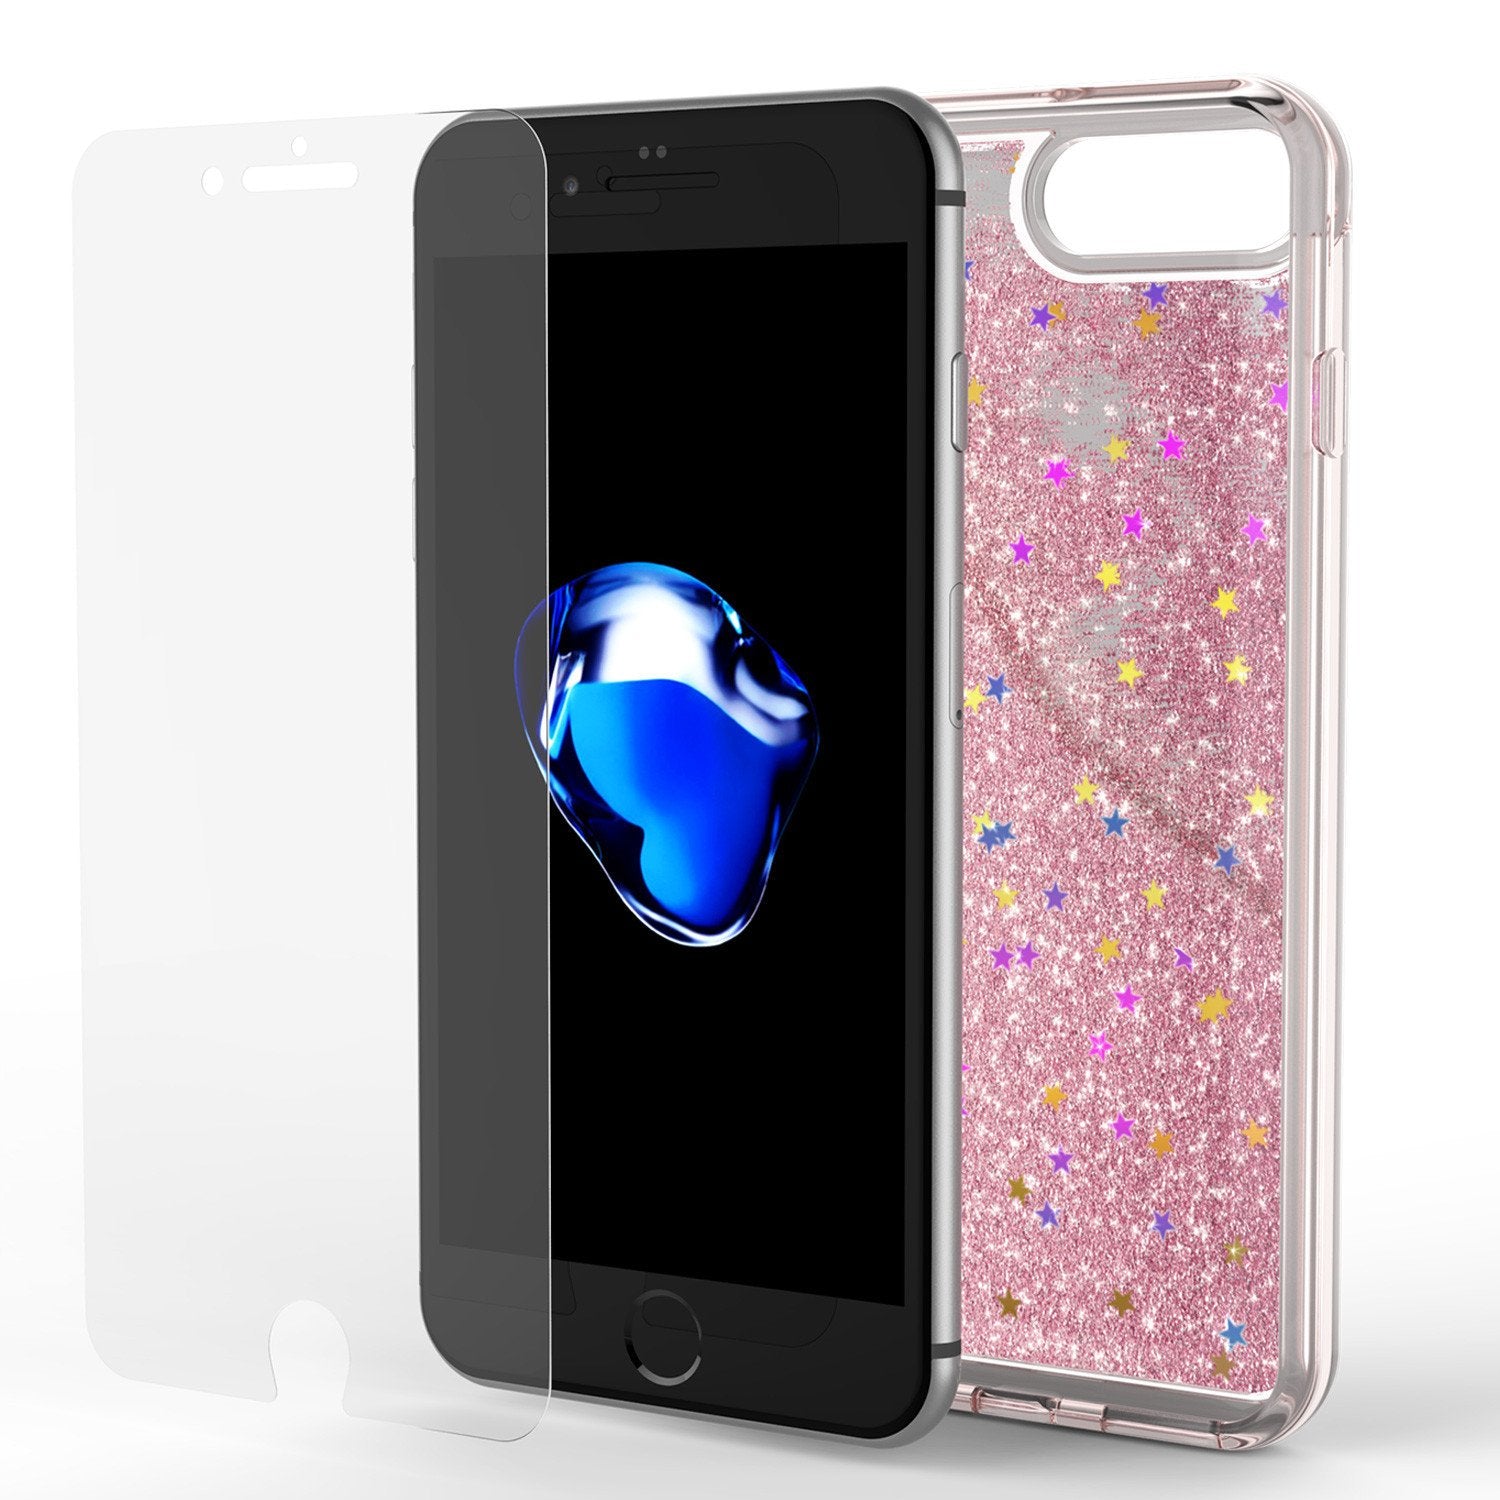 iPhone 7 Plus Case, Punkcase [Liquid Rose Series] Protective Dual Layer Floating Glitter Cover with lots of Bling & Sparkle + 0.3mm Tempered Glass Screen Protector for Apple iPhone 7s Plus